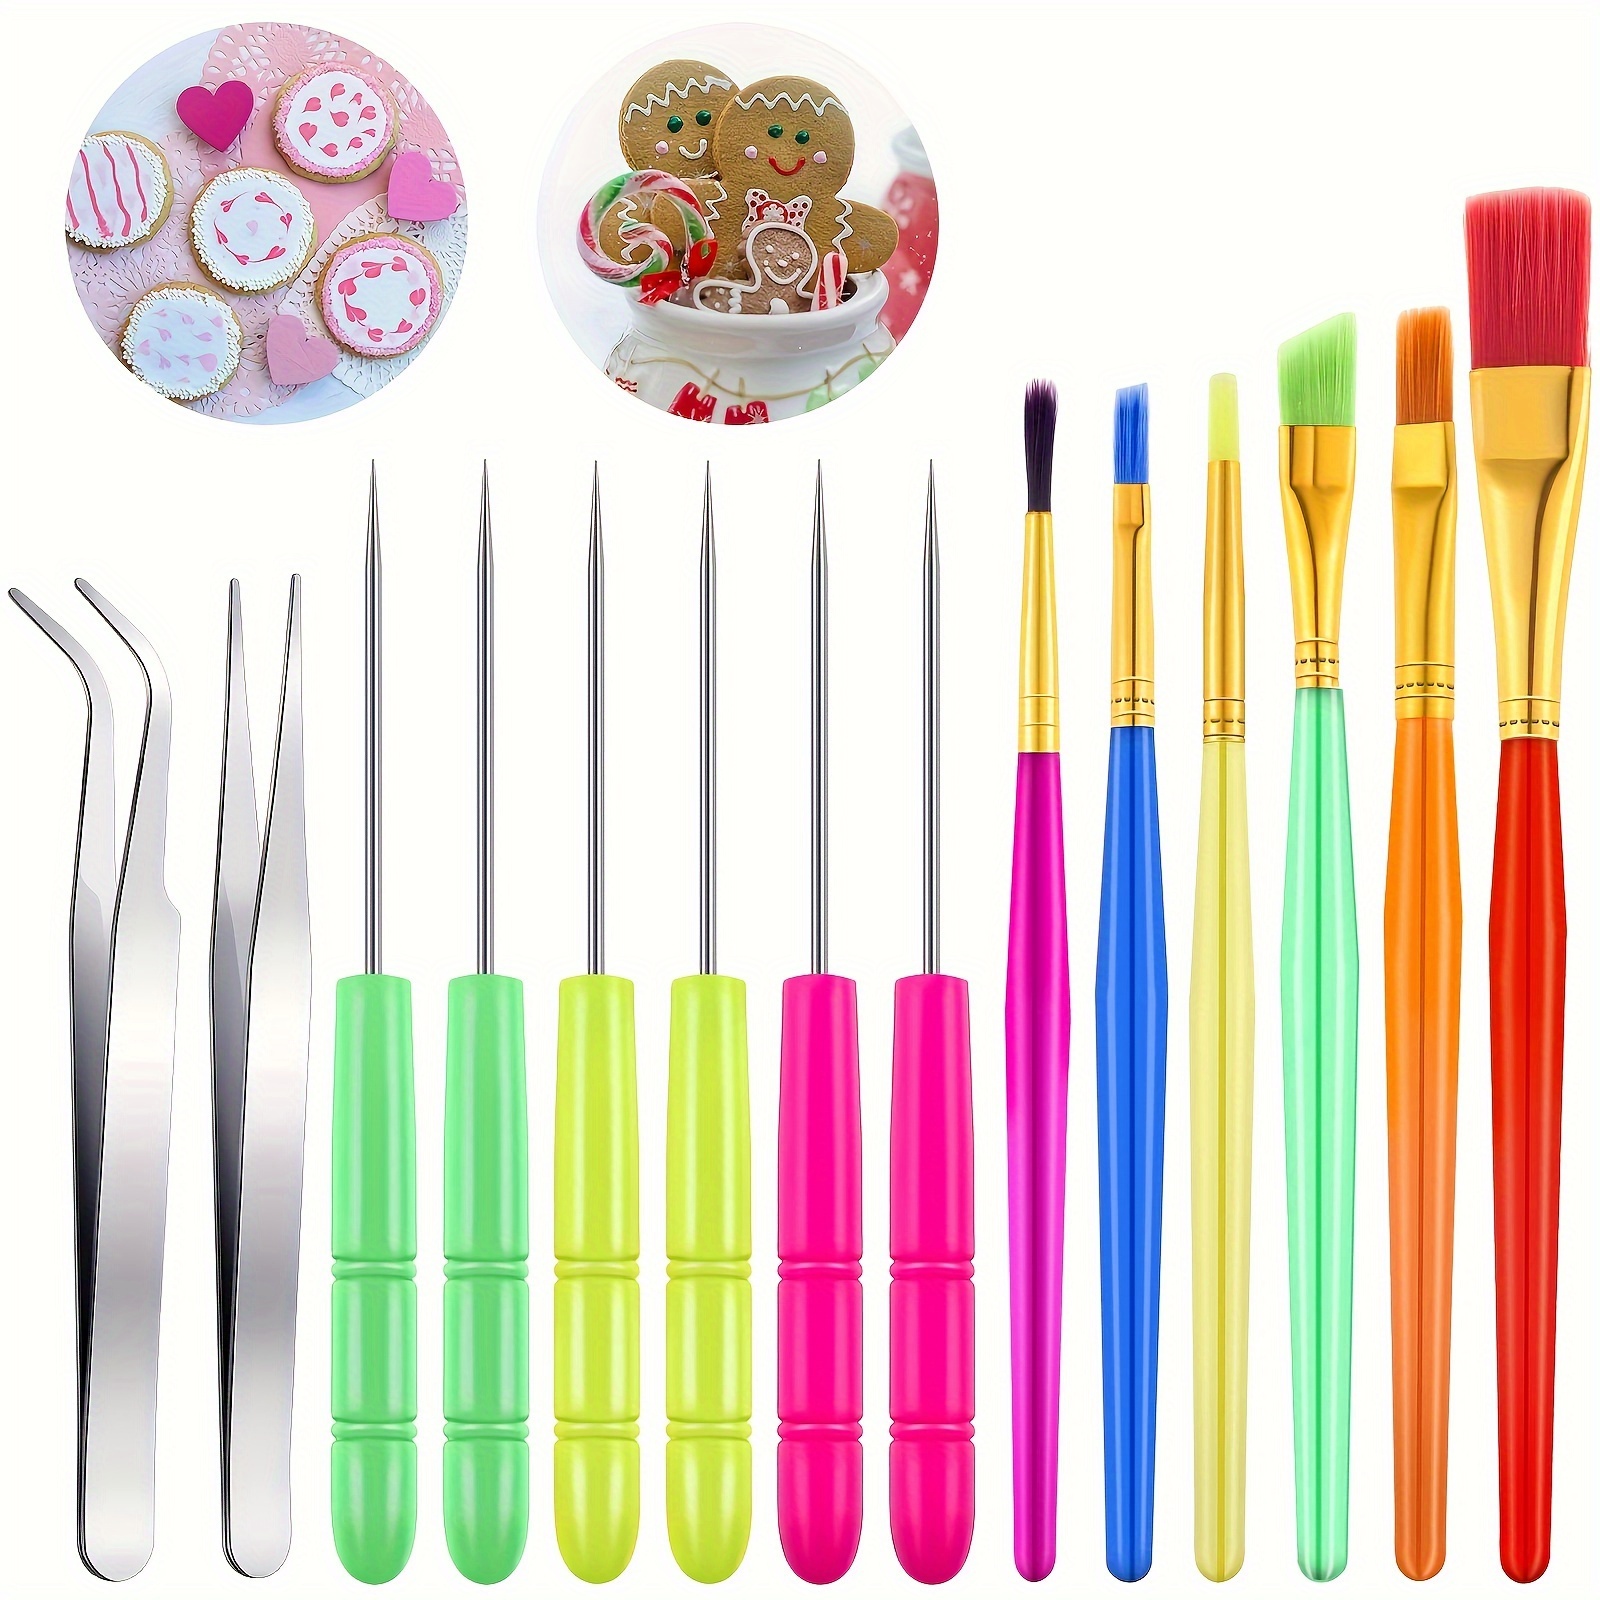 

14pcs Biscuit Decorating Kit, Cake Decorating Brush Scribe Tool, Sugar Stir Needle Baking Tweezers For Sprinkles Elbow And Straight Tweezers, Decorating Supplies For Cookie Cake Fondant